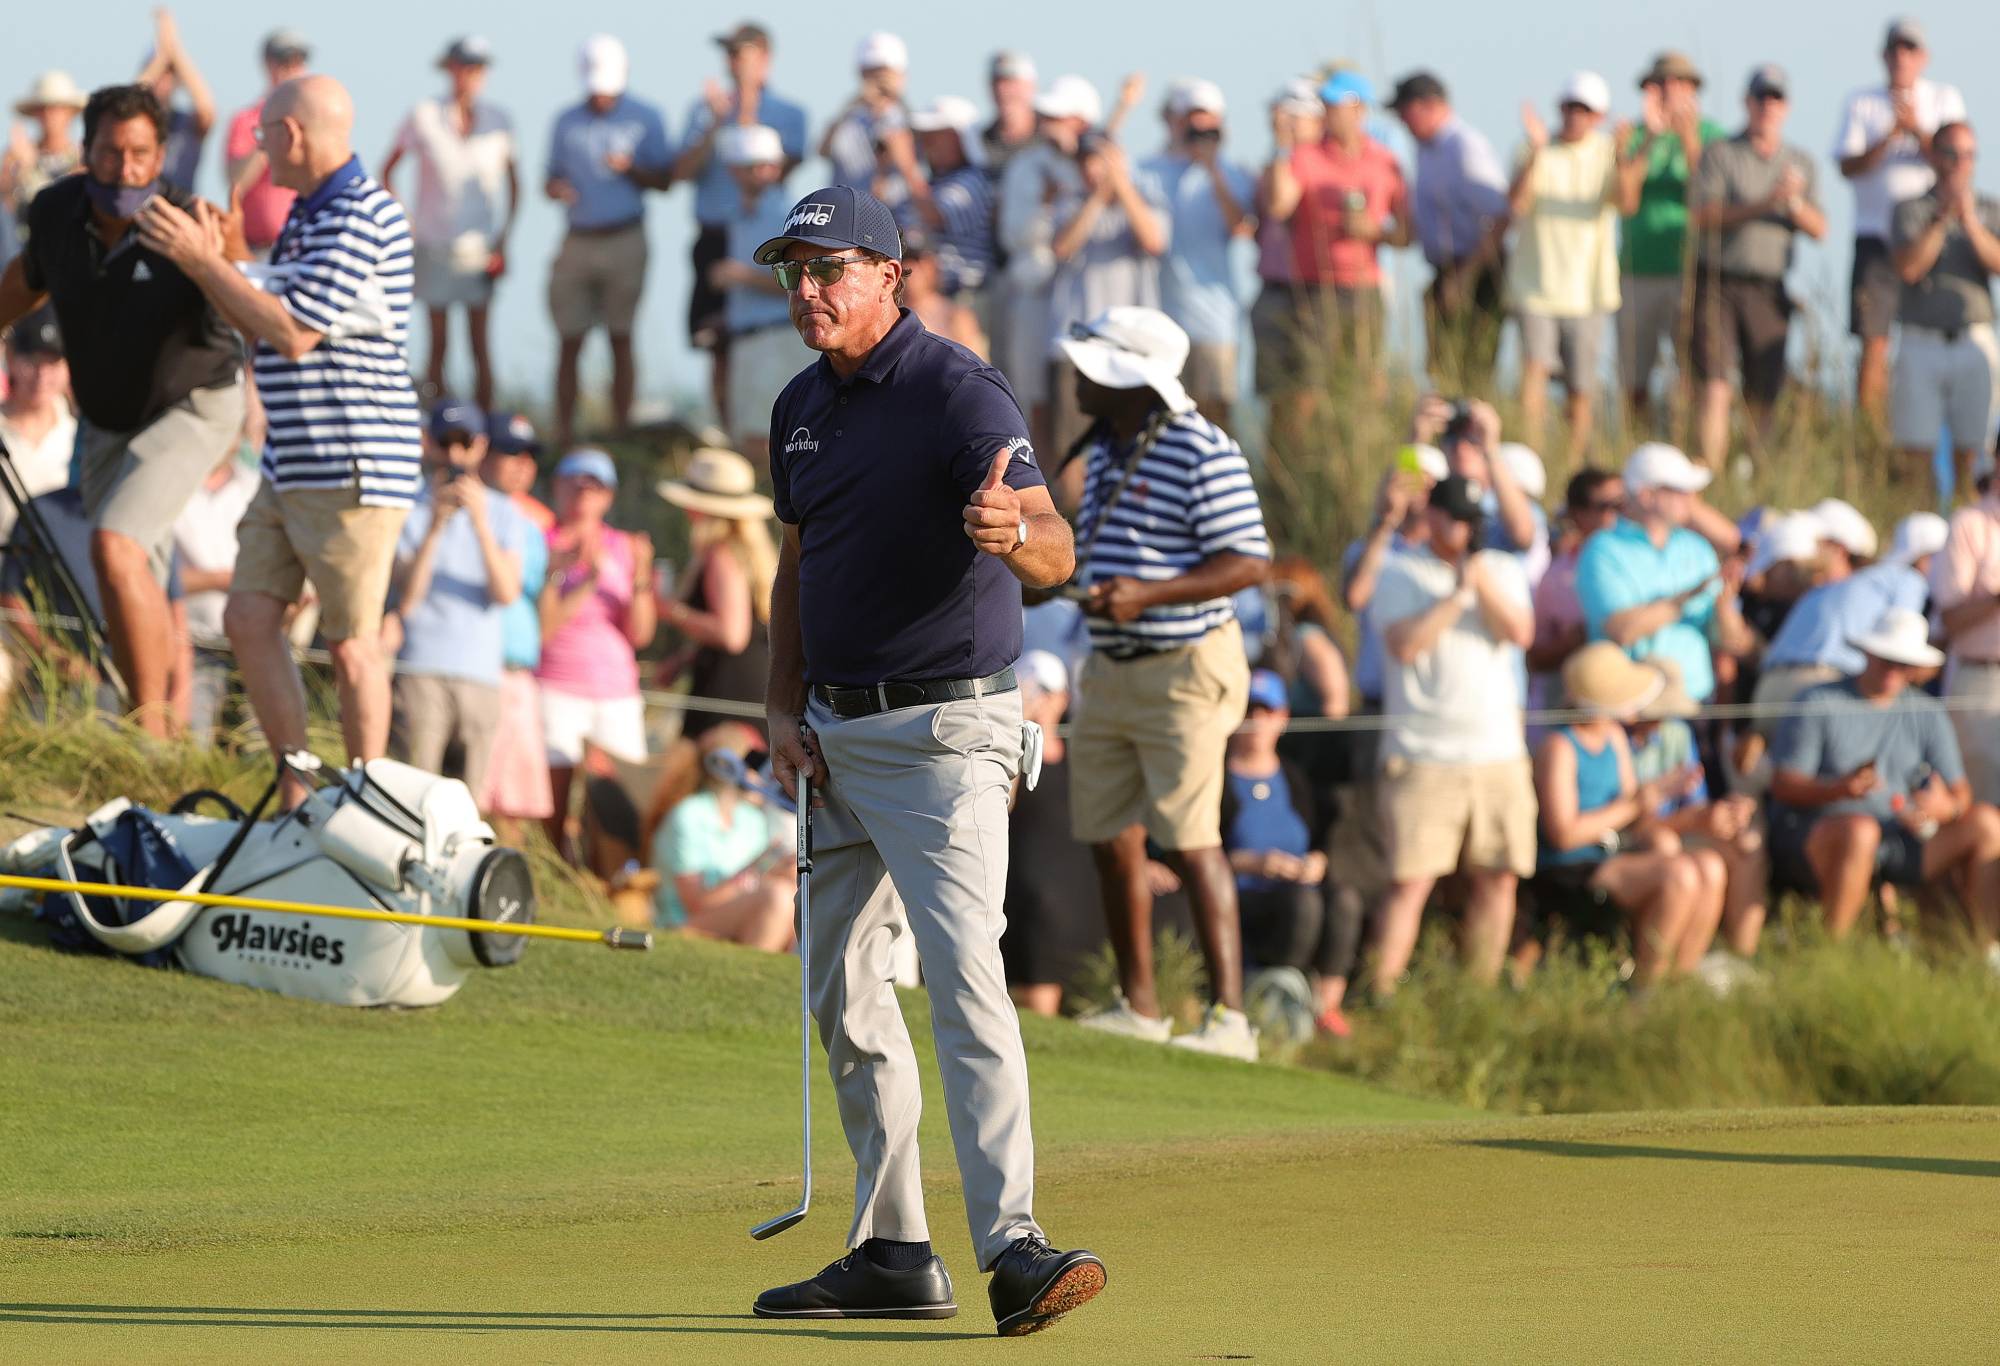 Phil Mickelson wins the PGA Championship